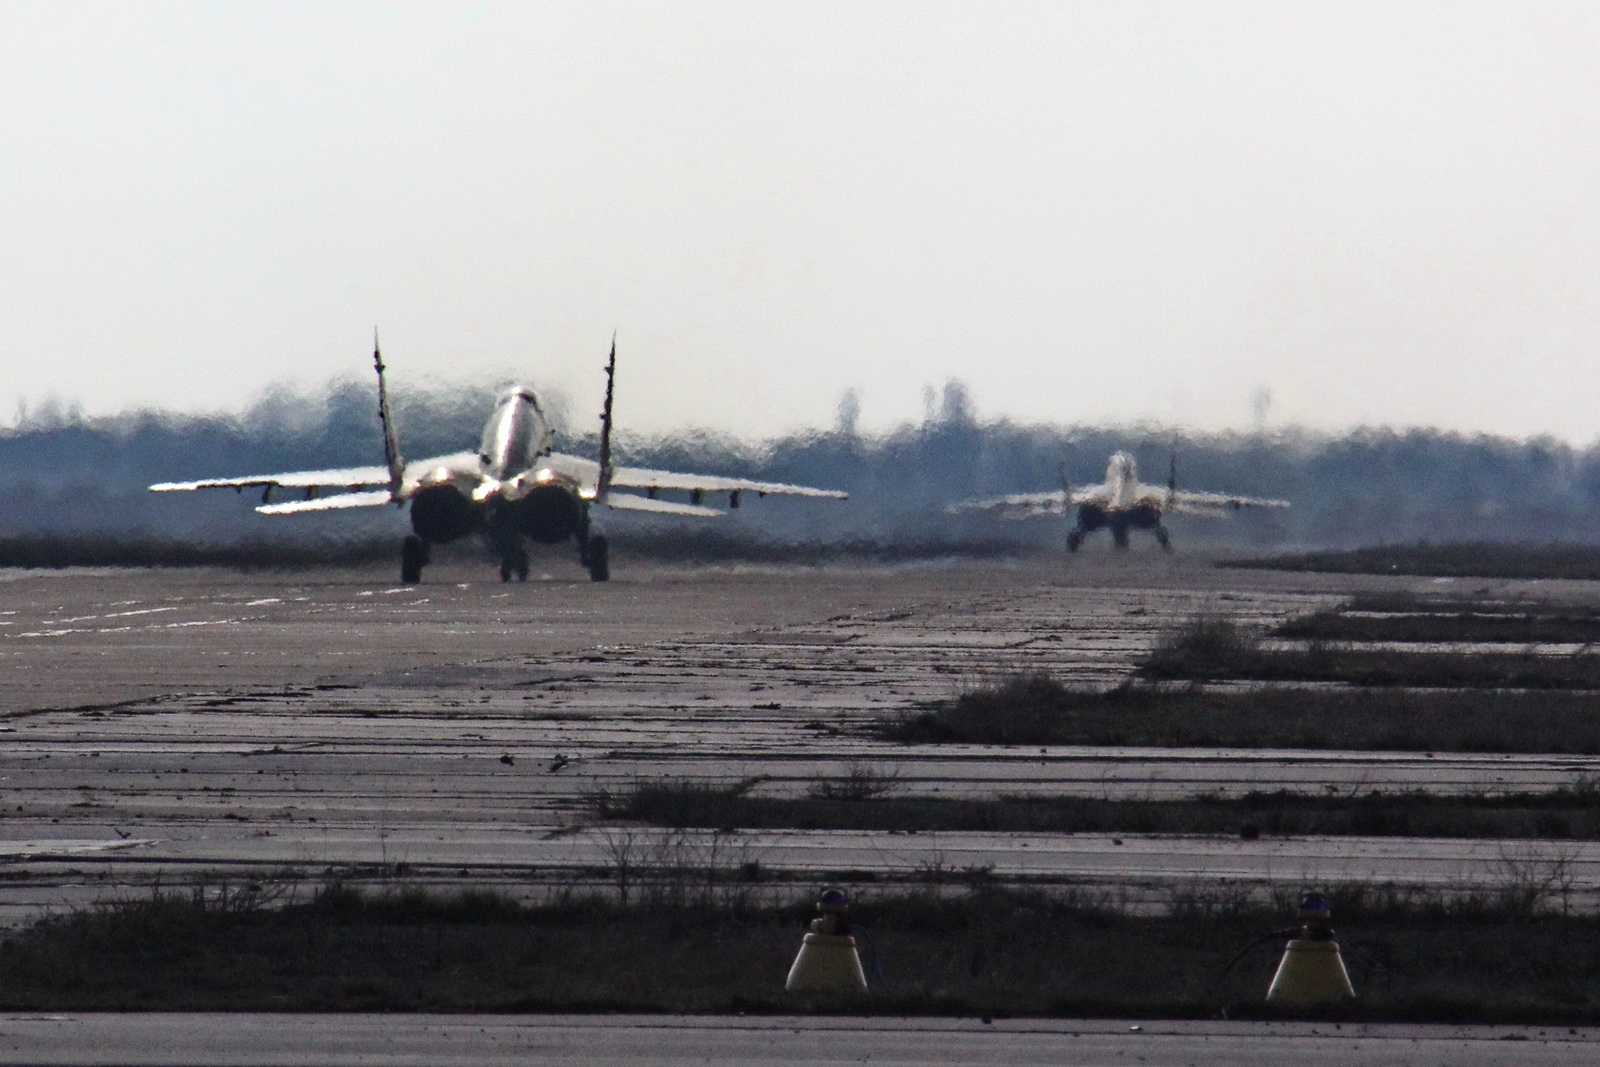 Ukrainian warplanes take off during practice flights at an airbase in the Mykolaiv Oblast on Feb. 21, 2018.